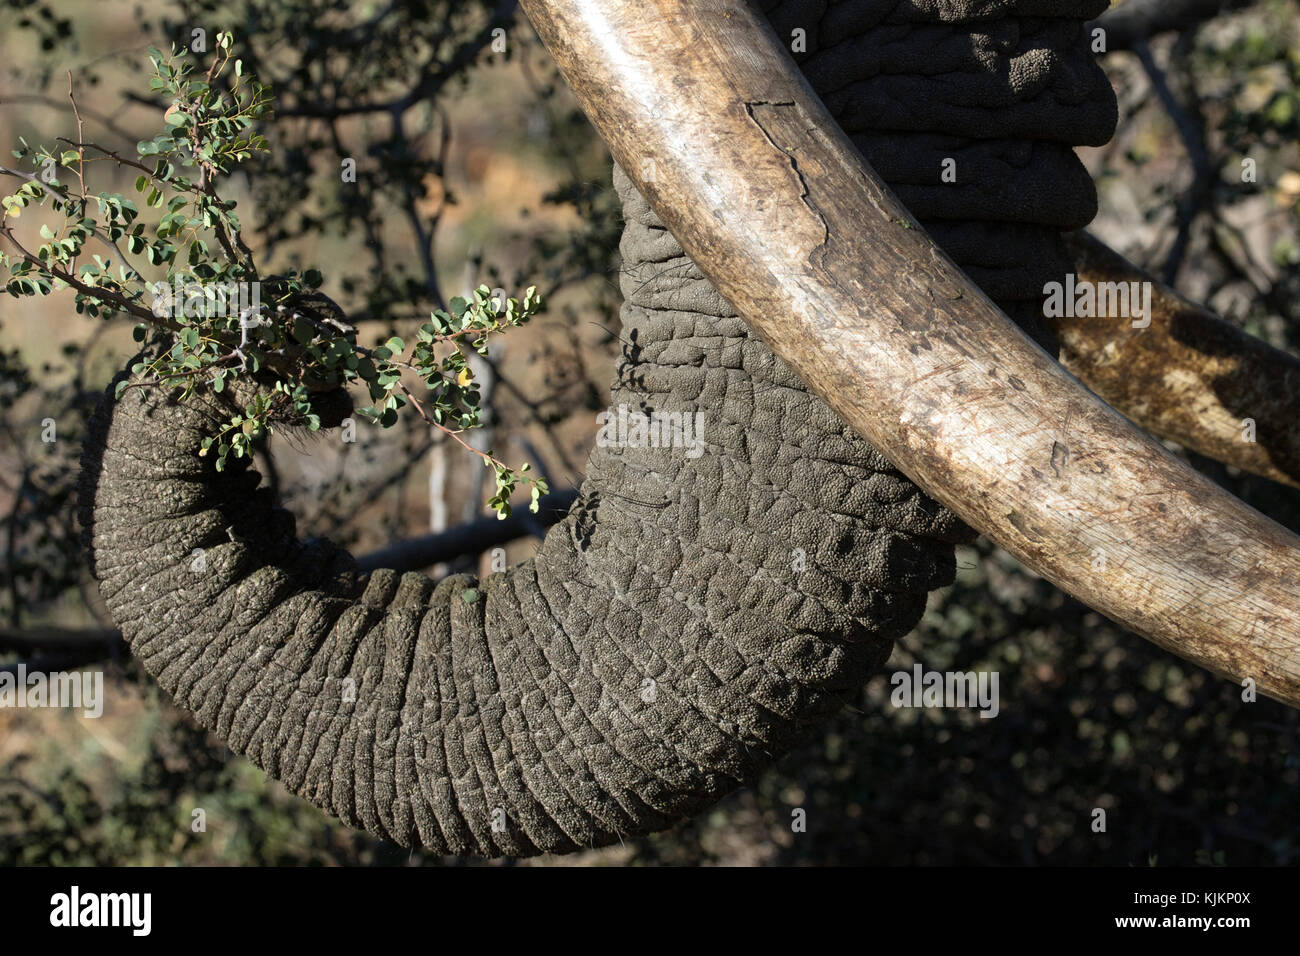 Kruger National Park.  African Elephant (Loxodonta africana). Close-up of trunk and tusk. South Africa. Stock Photo